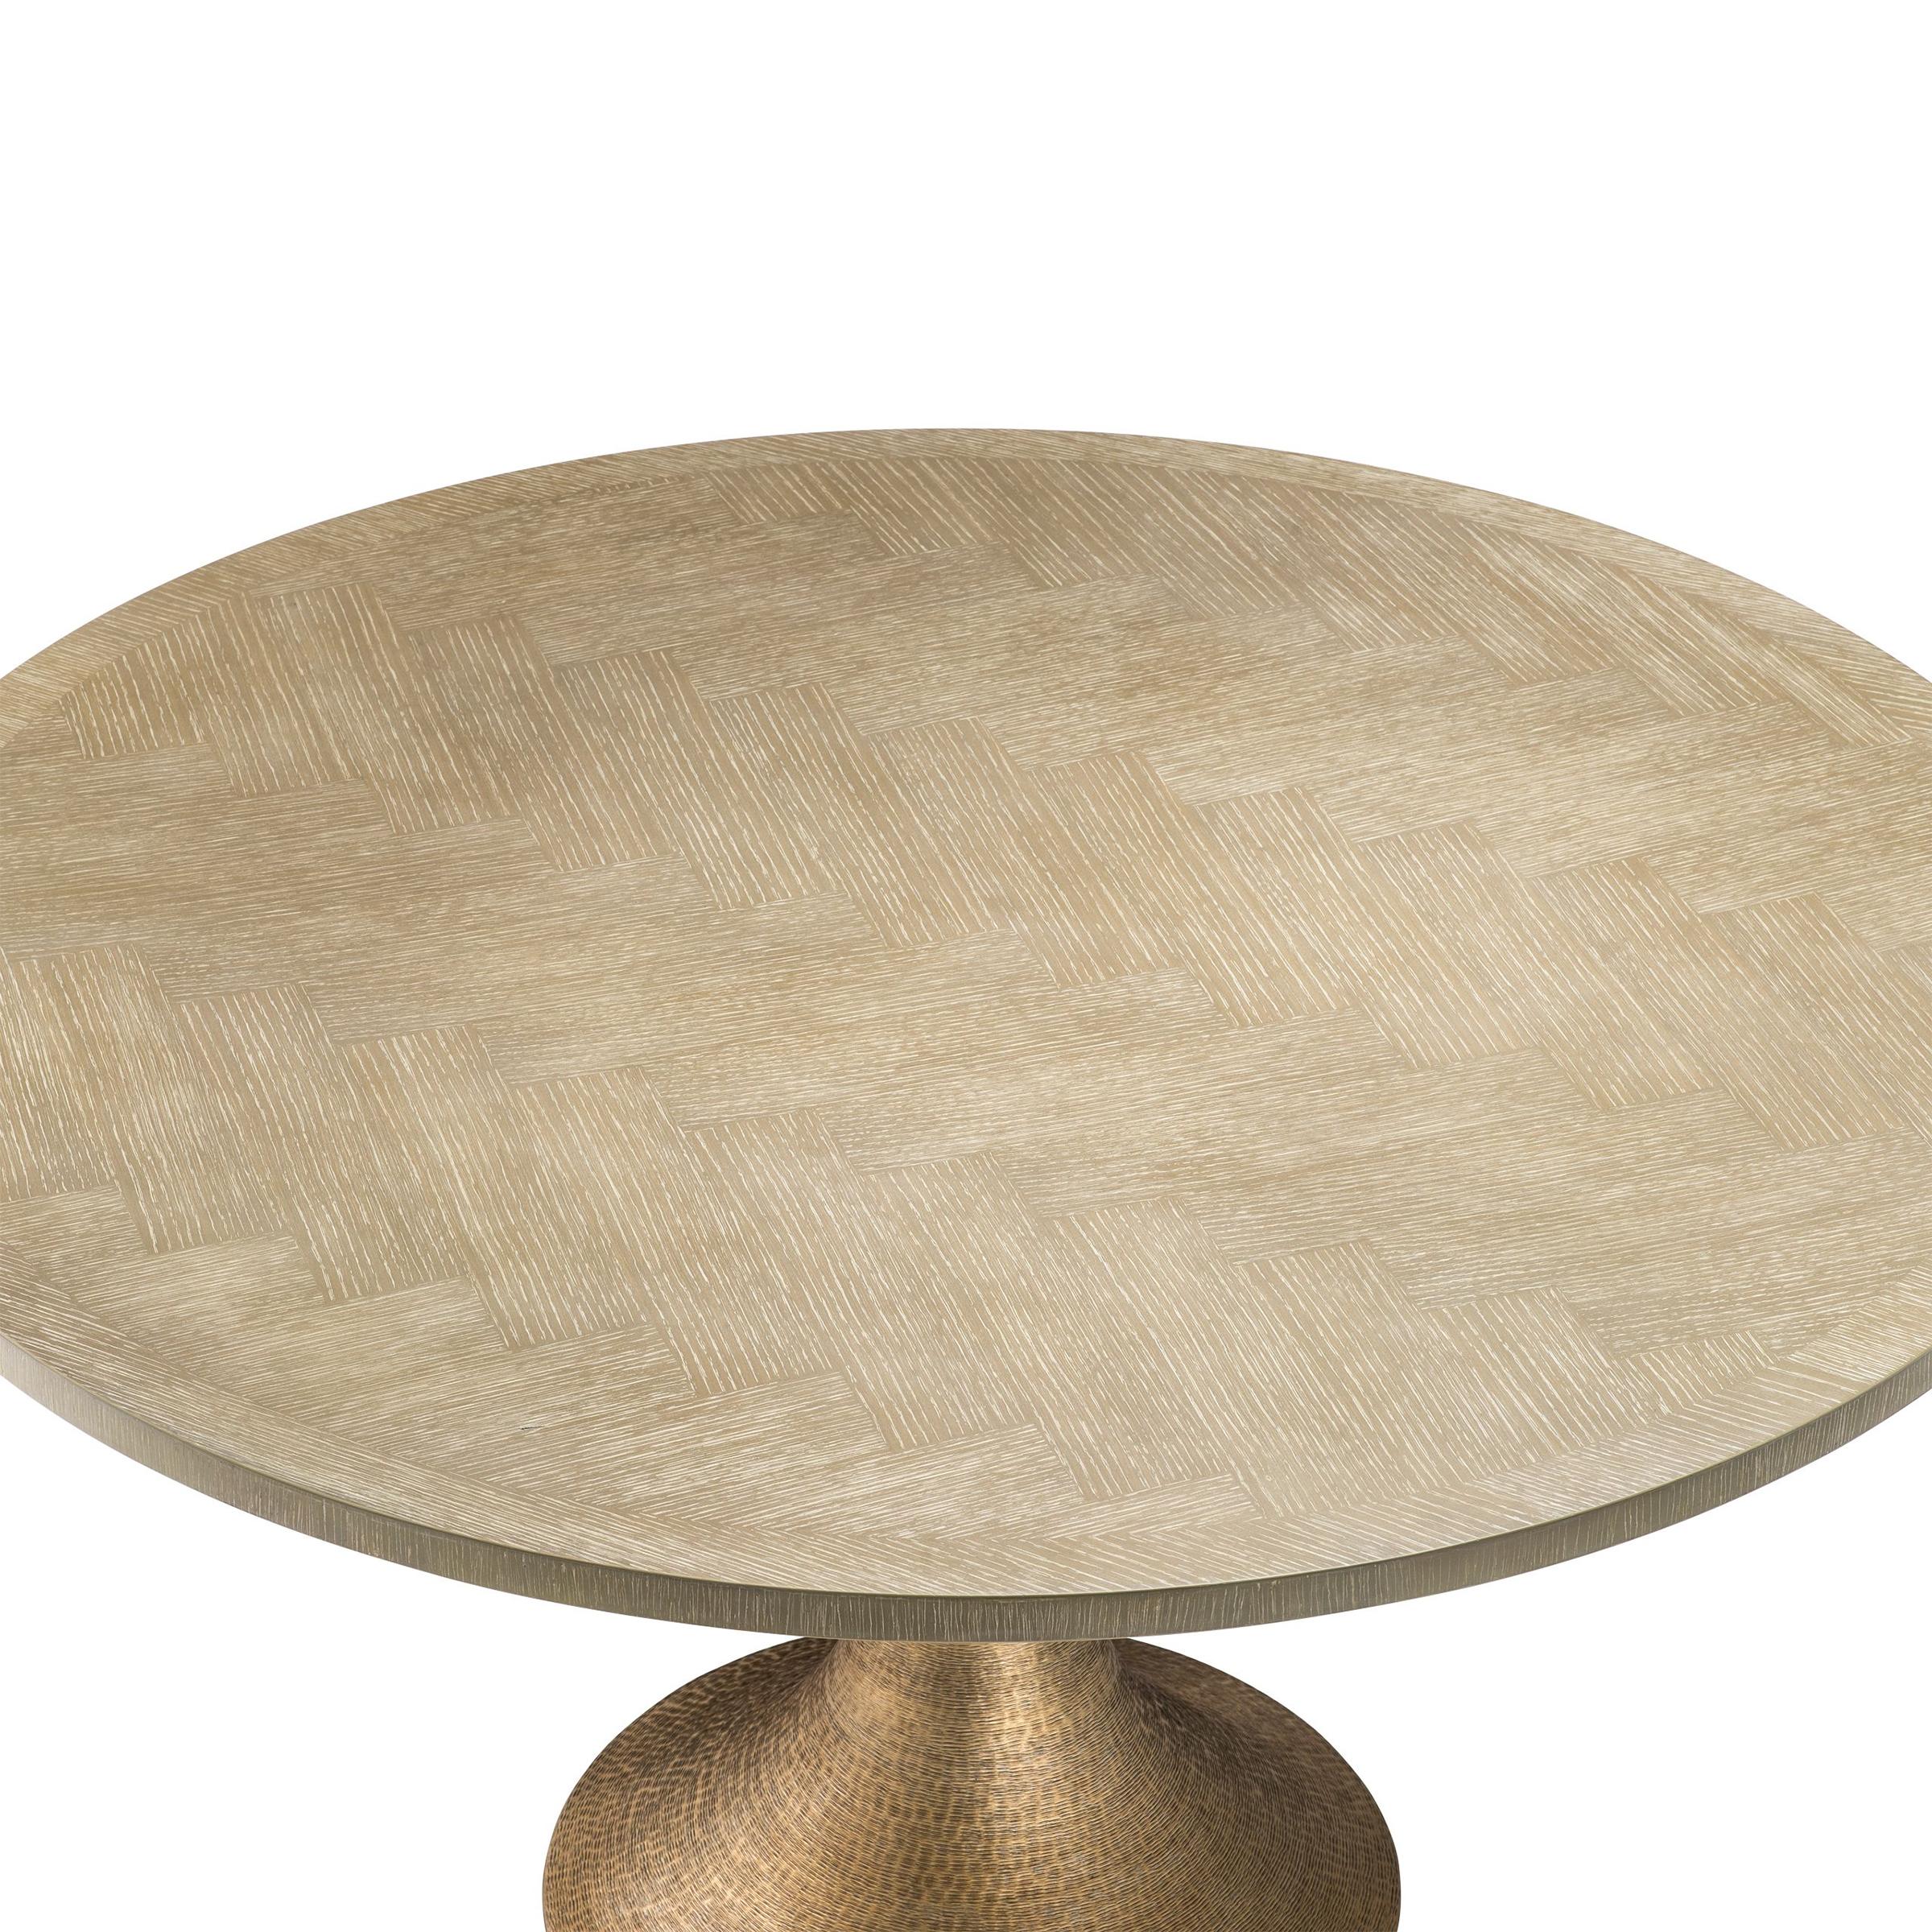 Indonesian Hammered Round Dining Table in Washed Oak